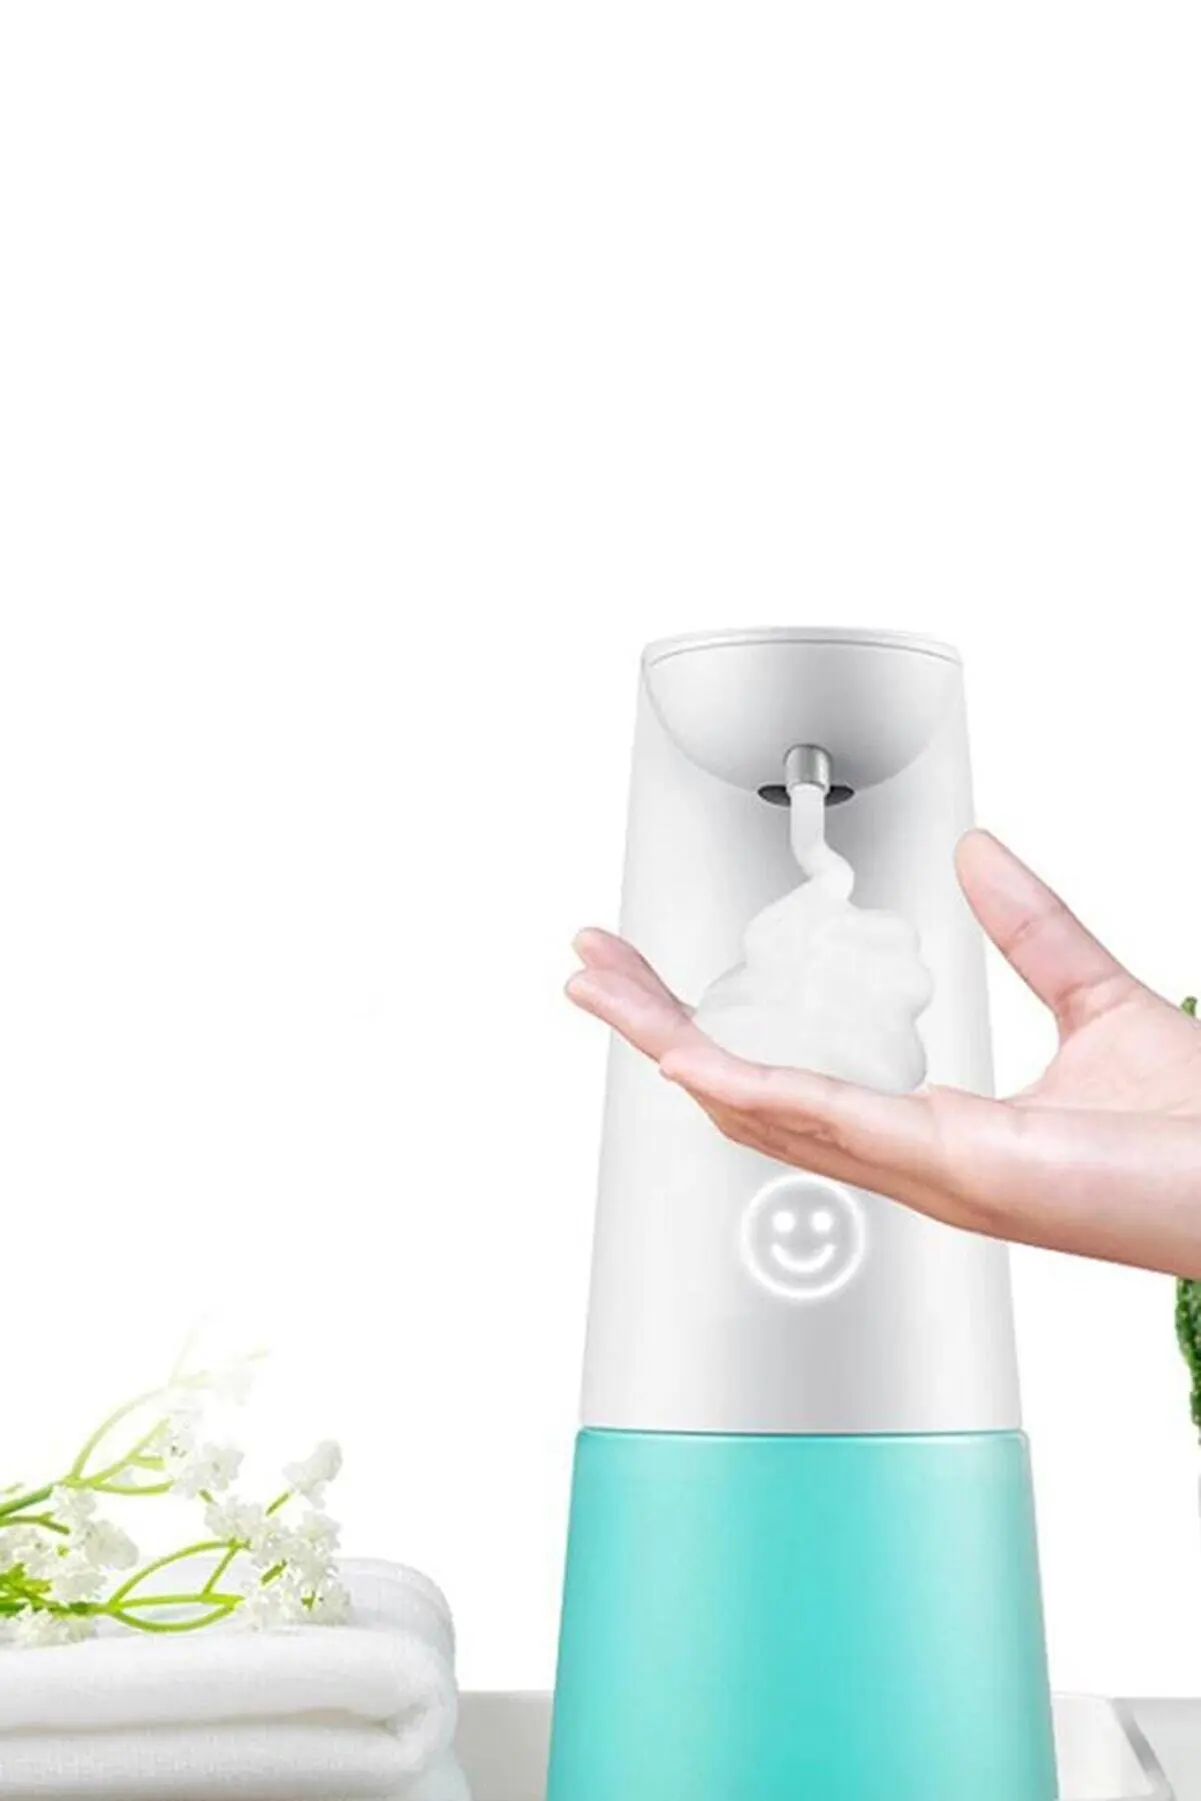 

Touchless Automatic Amount Adjustable Sensor Soap Dispenser 300 Ml With Battery Intelligent Infrared Liquid Soap Dispenser